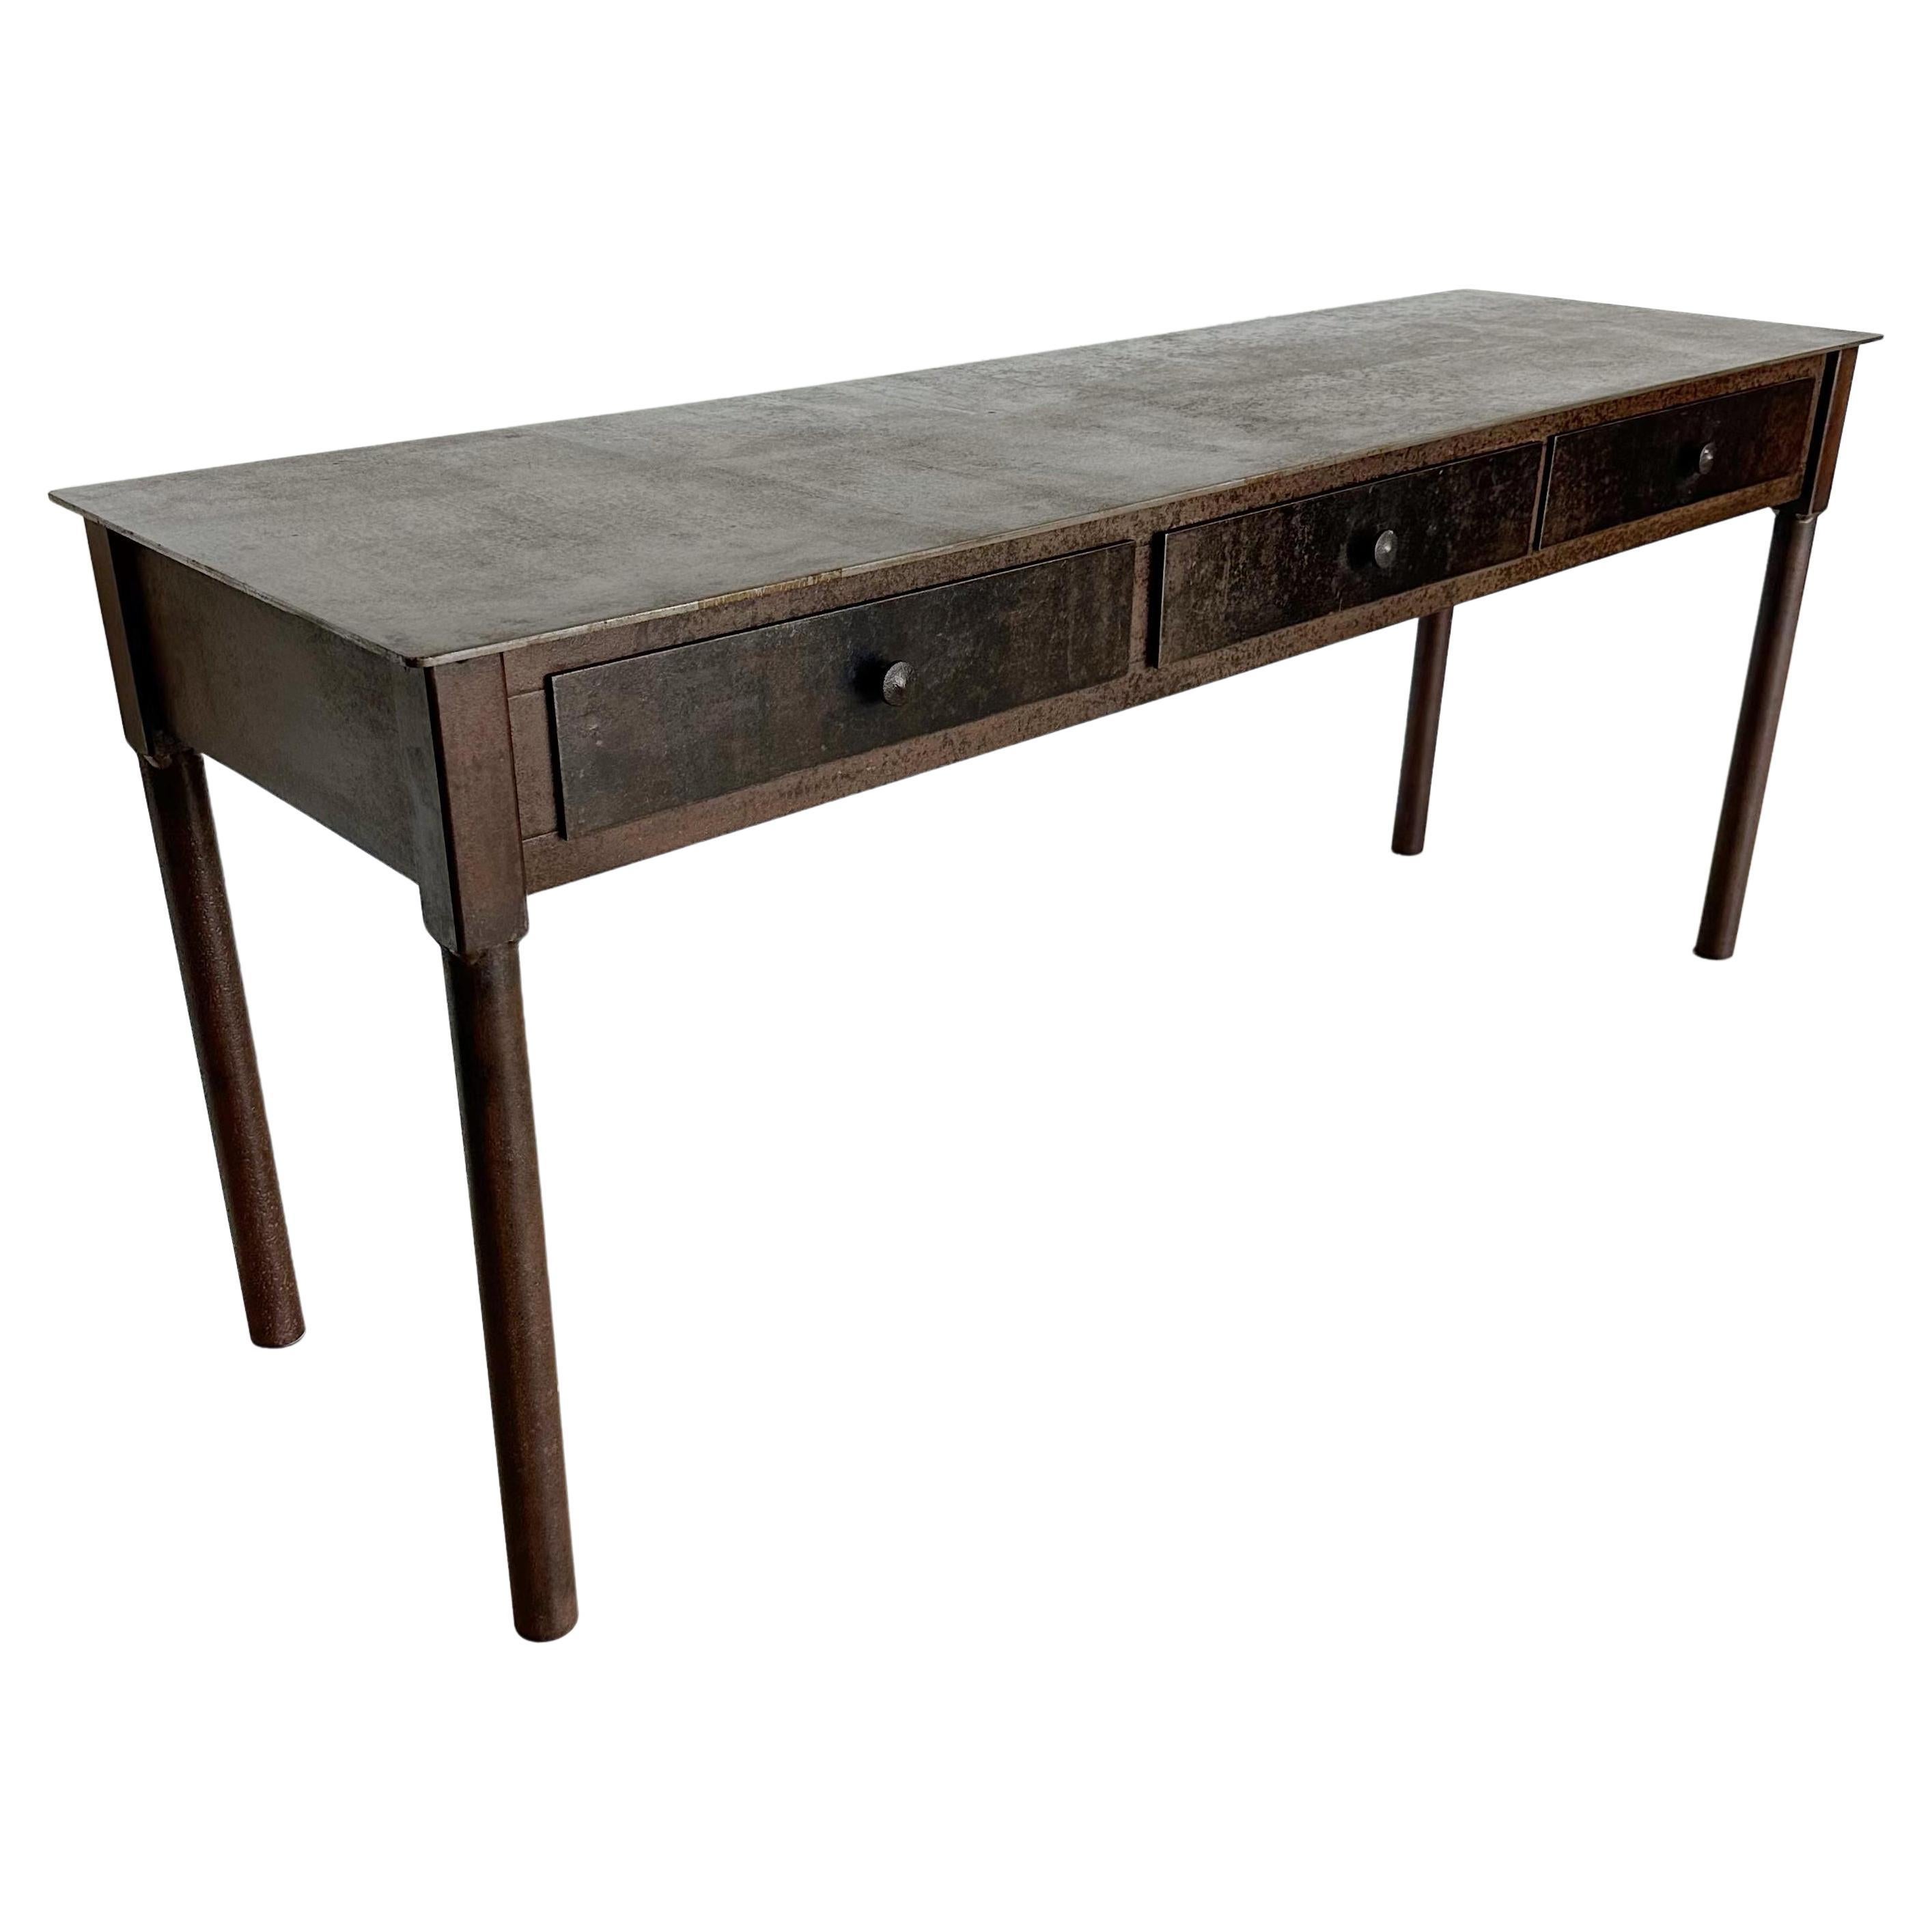 Jim Rose Shaker Inspired 3 Drawer Steel Console Table